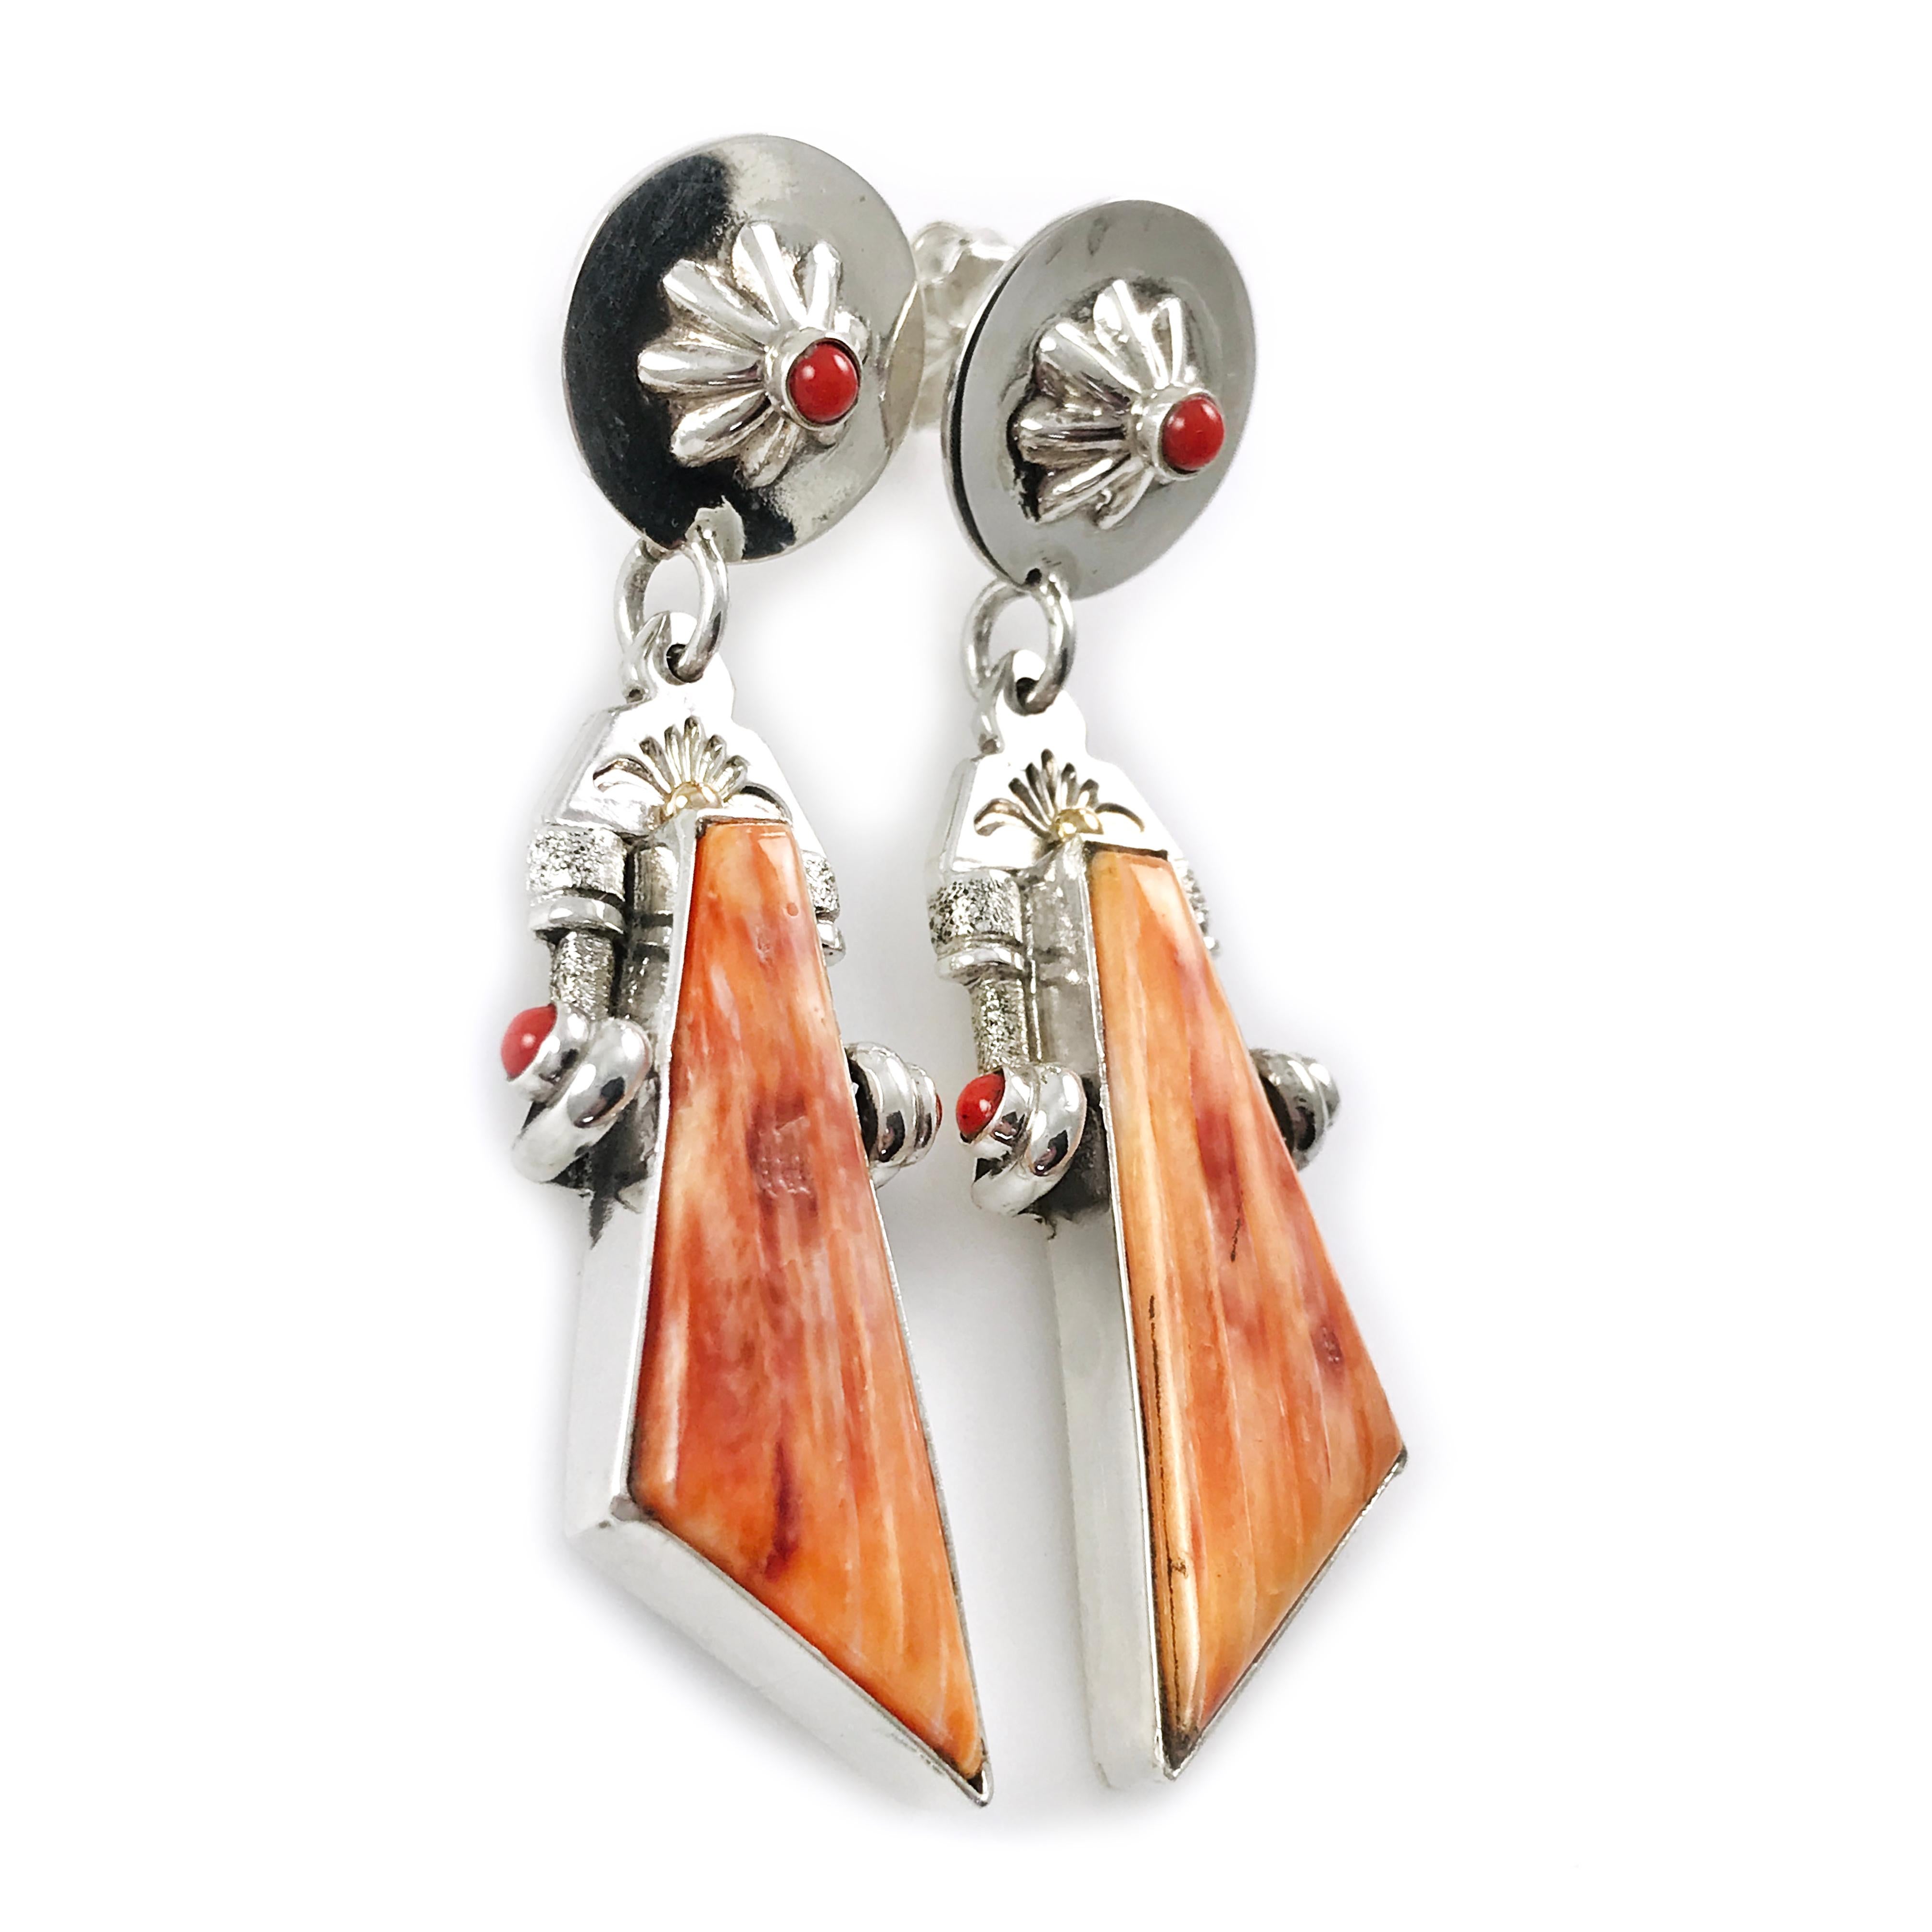 Handcrafted from Sterling Silver by jewelry maker, Ray Winner. These unique earrings feature an asymmetrical triangle-shaped spiny oyster cabochon and Mediterranean Coral round cabochons. Three Mediterranean Coral round cabochons are bezel-set in